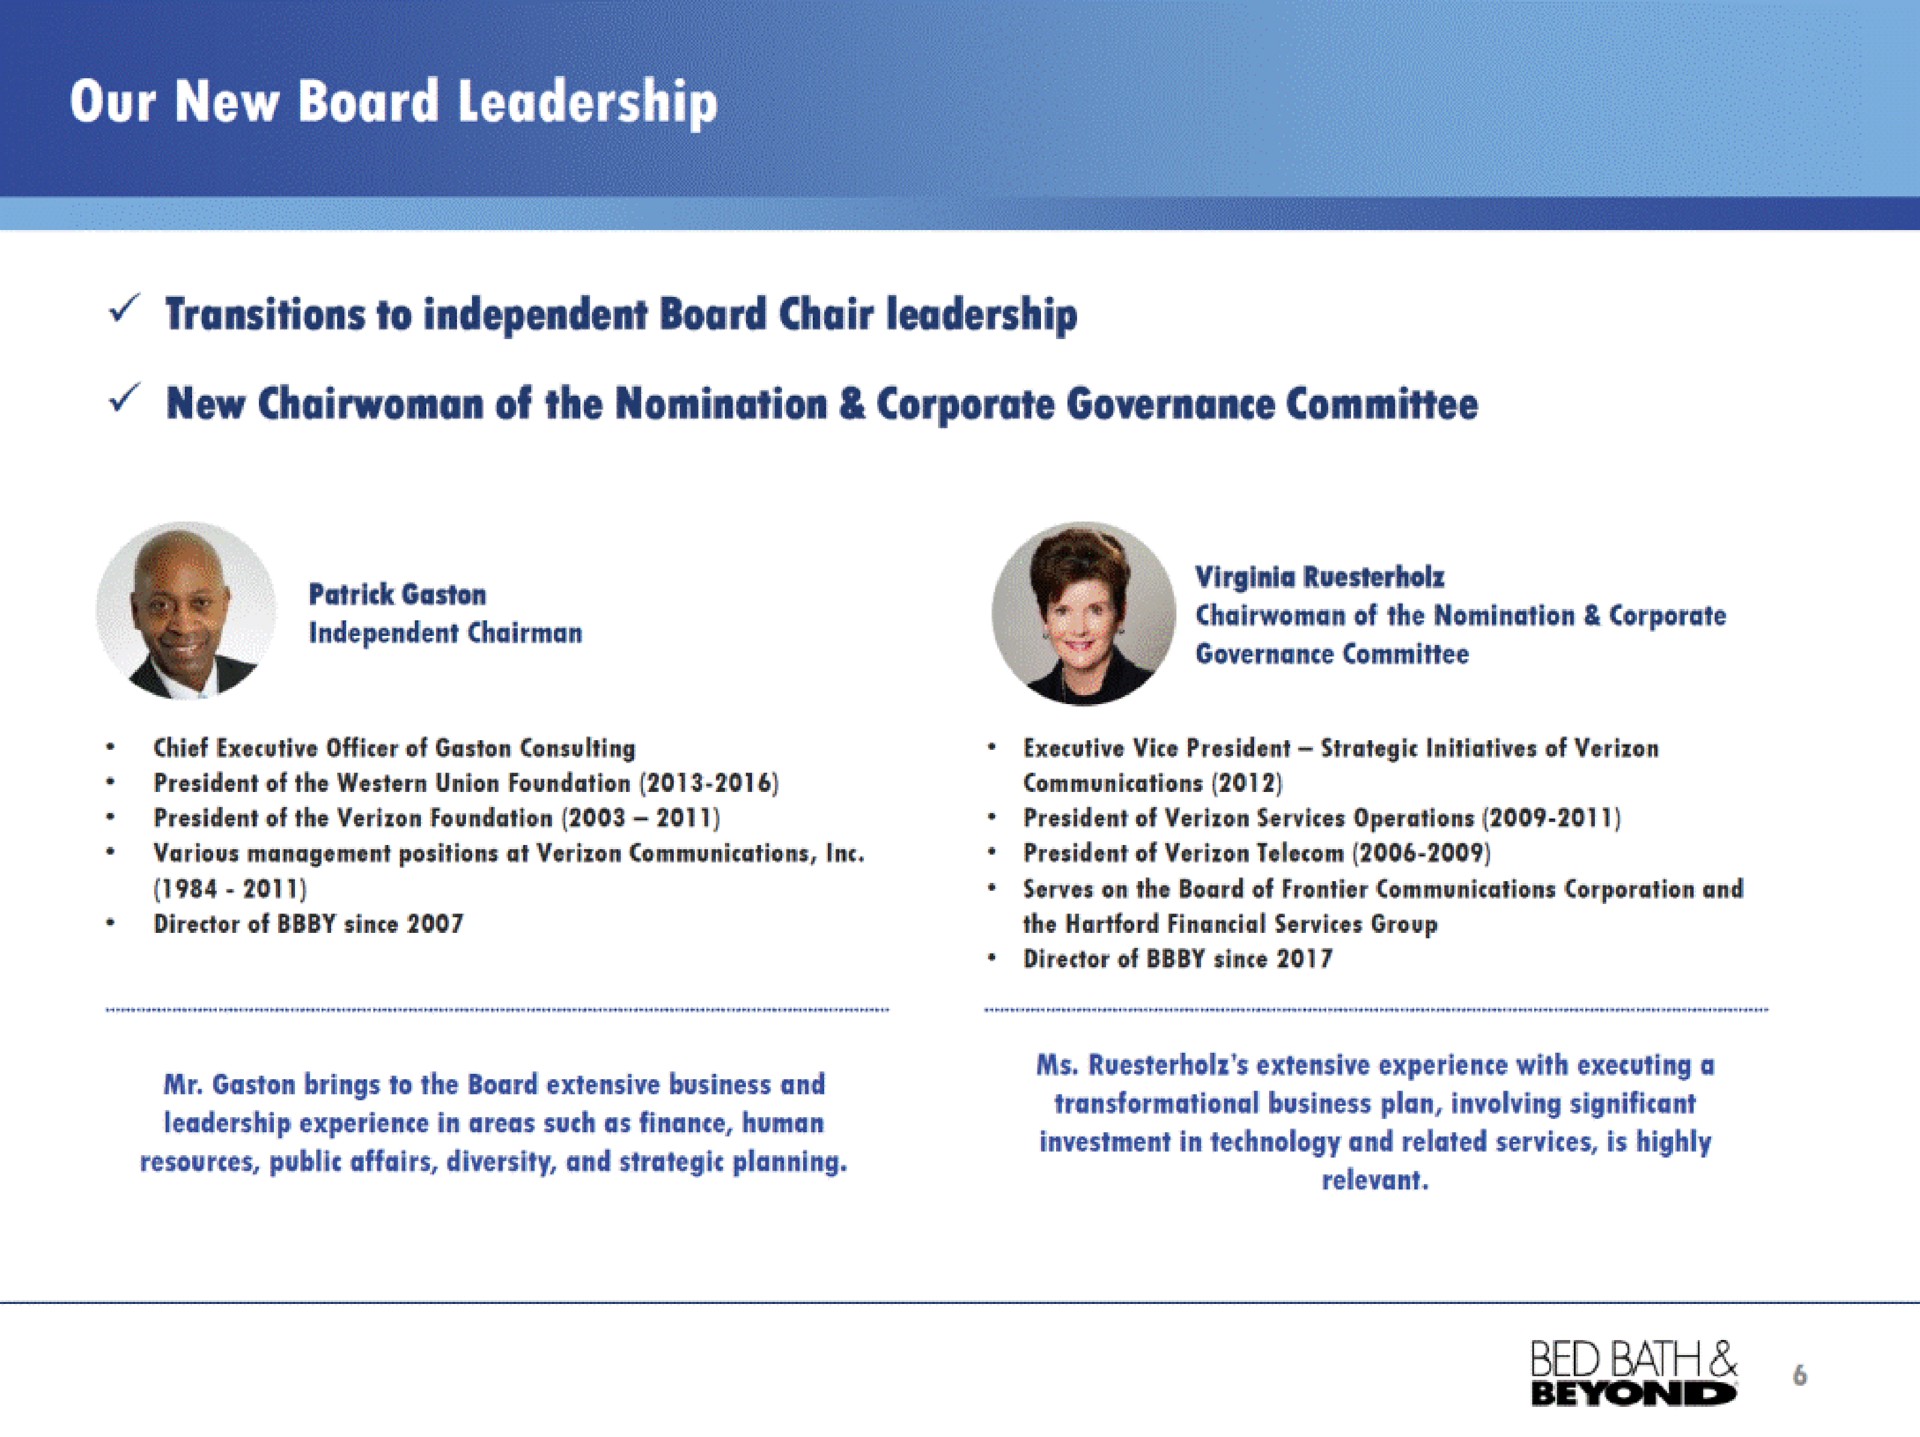 our new board leadership | Bed Bath & Beyond